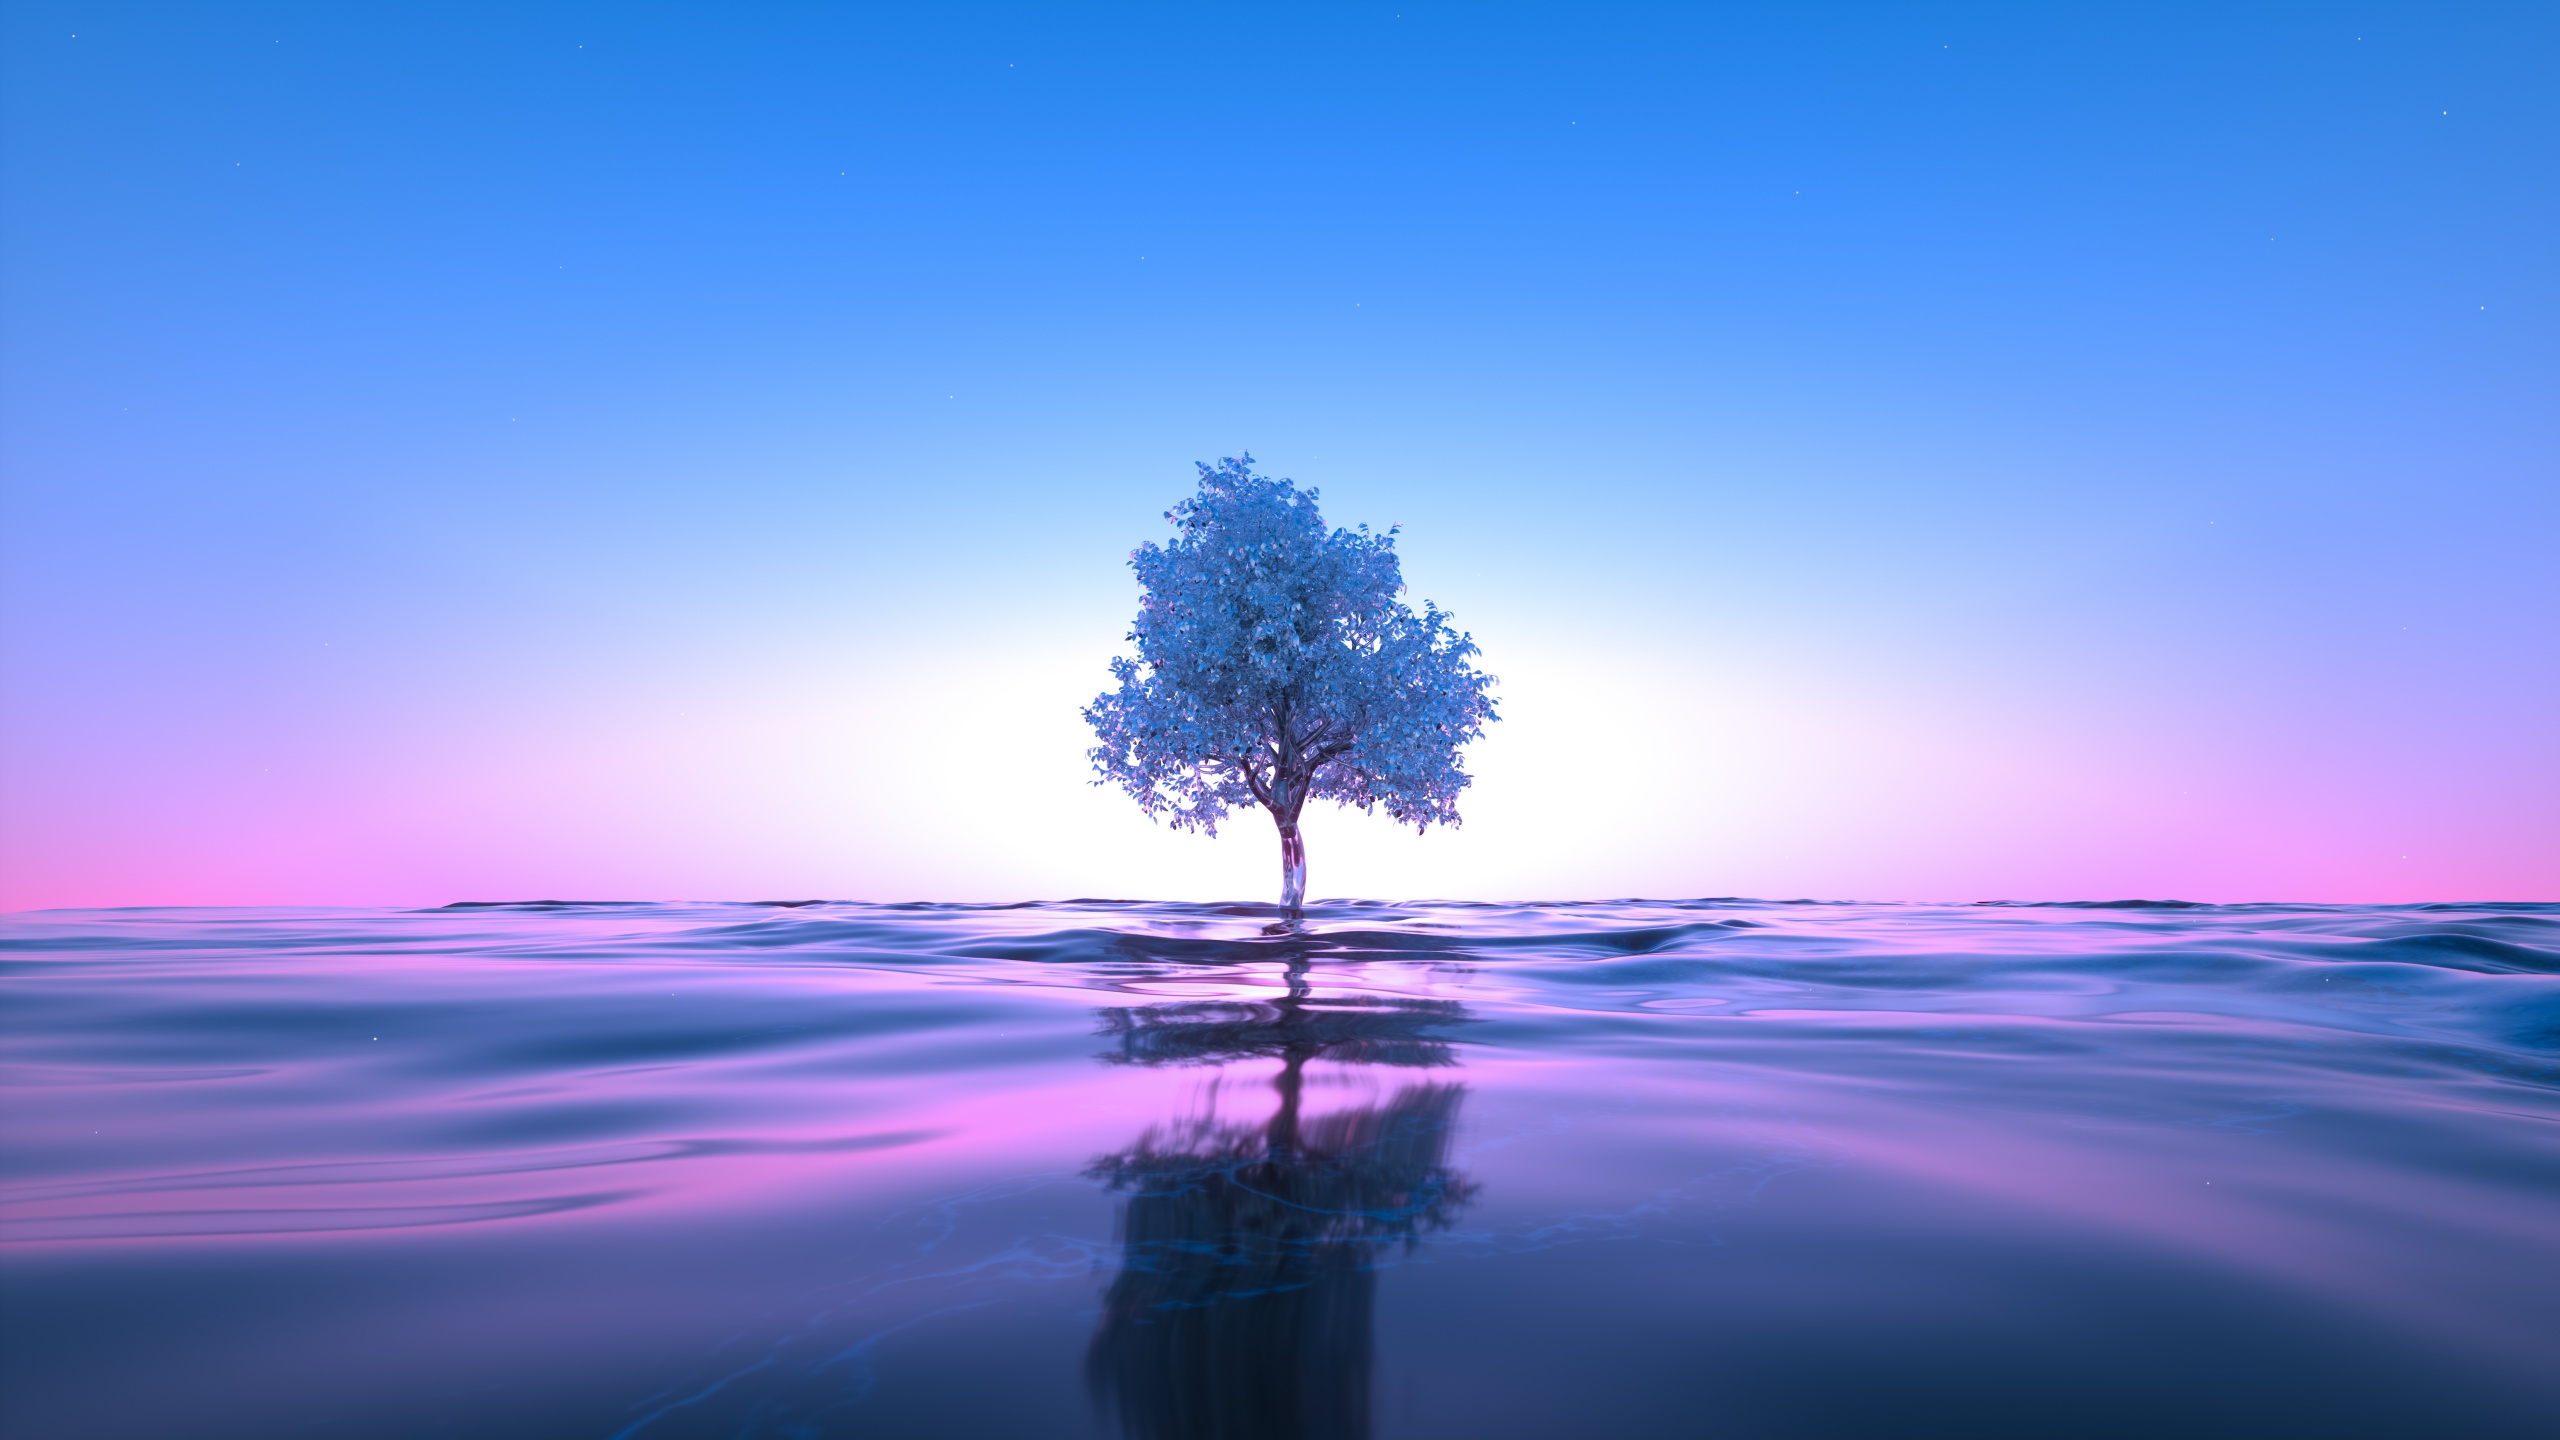 200000 Beautiful Tree Images  Free Pictures HD  Pixabay